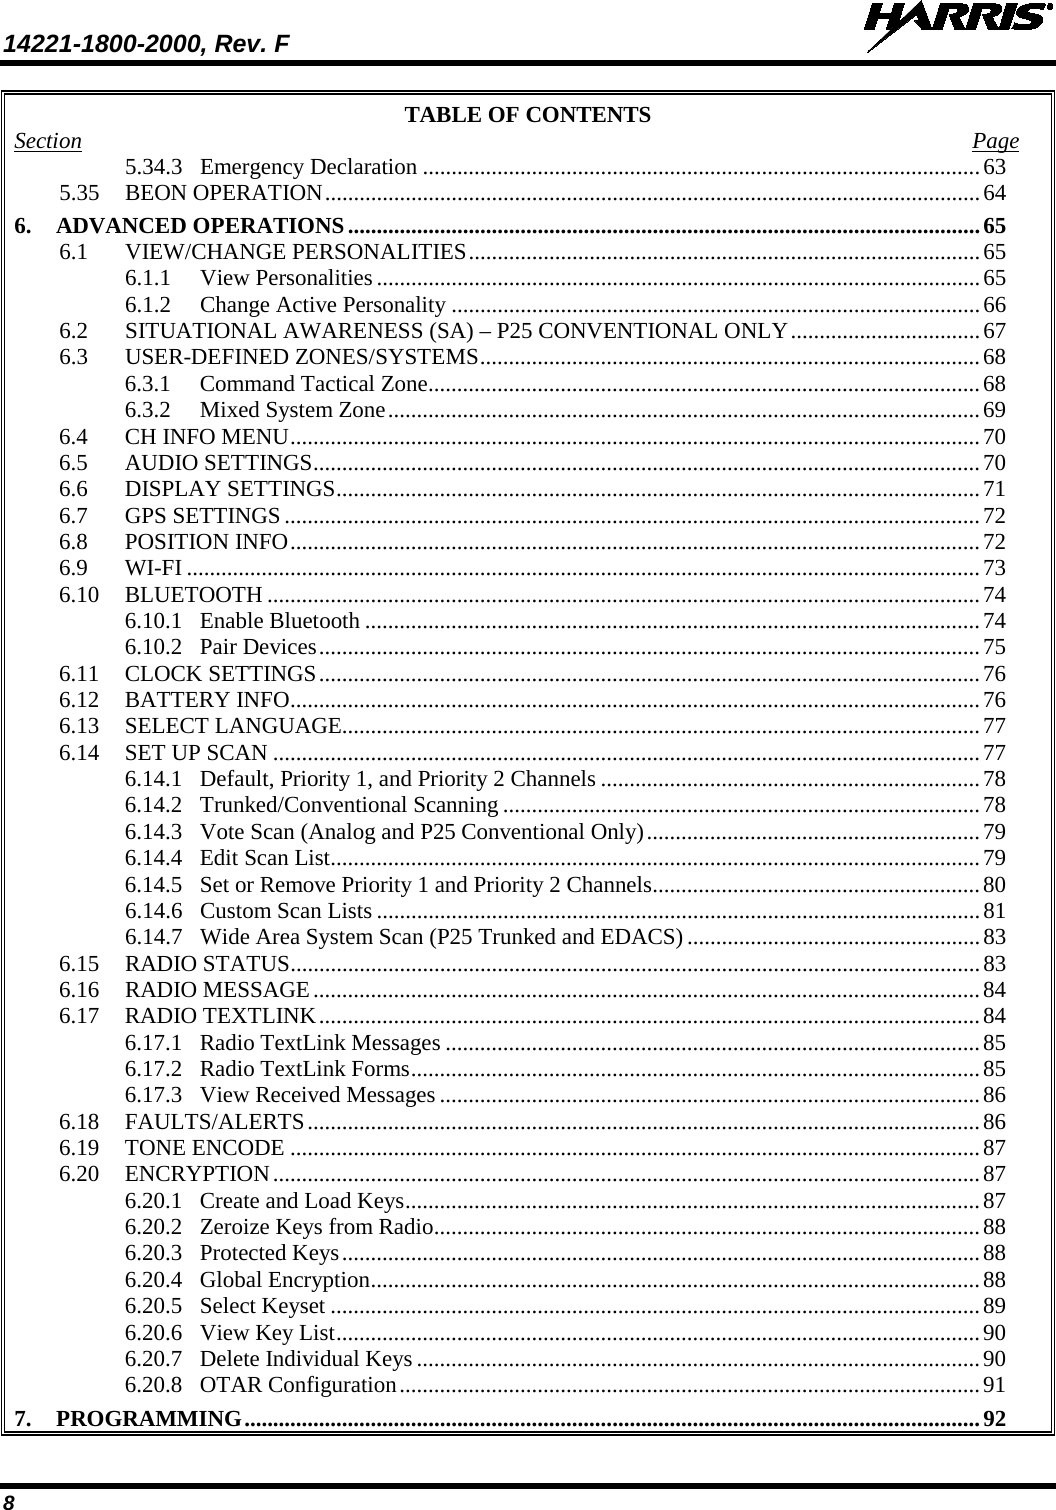 14221-1800-2000, Rev. F   8 TABLE OF CONTENTS Section  Page 5.34.3 Emergency Declaration ................................................................................................. 63 5.35 BEON OPERATION .................................................................................................................. 64 6. ADVANCED OPERATIONS .............................................................................................................. 65 6.1 VIEW/CHANGE PERSONALITIES ......................................................................................... 65 6.1.1 View Personalities ......................................................................................................... 65 6.1.2 Change Active Personality ............................................................................................ 66 6.2 SITUATIONAL AWARENESS (SA) – P25 CONVENTIONAL ONLY ................................. 67 6.3 USER-DEFINED ZONES/SYSTEMS ....................................................................................... 68 6.3.1 Command Tactical Zone ................................................................................................ 68 6.3.2 Mixed System Zone ....................................................................................................... 69 6.4 CH INFO MENU ........................................................................................................................ 70 6.5 AUDIO SETTINGS .................................................................................................................... 70 6.6 DISPLAY SETTINGS ................................................................................................................ 71 6.7 GPS SETTINGS ......................................................................................................................... 72 6.8 POSITION INFO ........................................................................................................................ 72 6.9 WI-FI .......................................................................................................................................... 73 6.10 BLUETOOTH ............................................................................................................................ 74 6.10.1 Enable Bluetooth ........................................................................................................... 74 6.10.2 Pair Devices ................................................................................................................... 75 6.11 CLOCK SETTINGS ................................................................................................................... 76 6.12 BATTERY INFO ........................................................................................................................ 76 6.13 SELECT LANGUAGE............................................................................................................... 77 6.14 SET UP SCAN ........................................................................................................................... 77 6.14.1 Default, Priority 1, and Priority 2 Channels .................................................................. 78 6.14.2 Trunked/Conventional Scanning ................................................................................... 78 6.14.3 Vote Scan (Analog and P25 Conventional Only) .......................................................... 79 6.14.4 Edit Scan List ................................................................................................................. 79 6.14.5 Set or Remove Priority 1 and Priority 2 Channels ......................................................... 80 6.14.6 Custom Scan Lists ......................................................................................................... 81 6.14.7 Wide Area System Scan (P25 Trunked and EDACS) ................................................... 83 6.15 RADIO STATUS ........................................................................................................................ 83 6.16 RADIO MESSAGE .................................................................................................................... 84 6.17 RADIO TEXTLINK ................................................................................................................... 84 6.17.1 Radio TextLink Messages ............................................................................................. 85 6.17.2 Radio TextLink Forms ................................................................................................... 85 6.17.3 View Received Messages .............................................................................................. 86 6.18 FAULTS/ALERTS ..................................................................................................................... 86 6.19 TONE ENCODE ........................................................................................................................ 87 6.20 ENCRYPTION ........................................................................................................................... 87 6.20.1 Create and Load Keys .................................................................................................... 87 6.20.2 Zeroize Keys from Radio ............................................................................................... 88 6.20.3 Protected Keys ............................................................................................................... 88 6.20.4 Global Encryption .......................................................................................................... 88 6.20.5 Select Keyset ................................................................................................................. 89 6.20.6 View Key List ................................................................................................................ 90 6.20.7 Delete Individual Keys .................................................................................................. 90 6.20.8 OTAR Configuration ..................................................................................................... 91 7. PROGRAMMING ................................................................................................................................ 92 